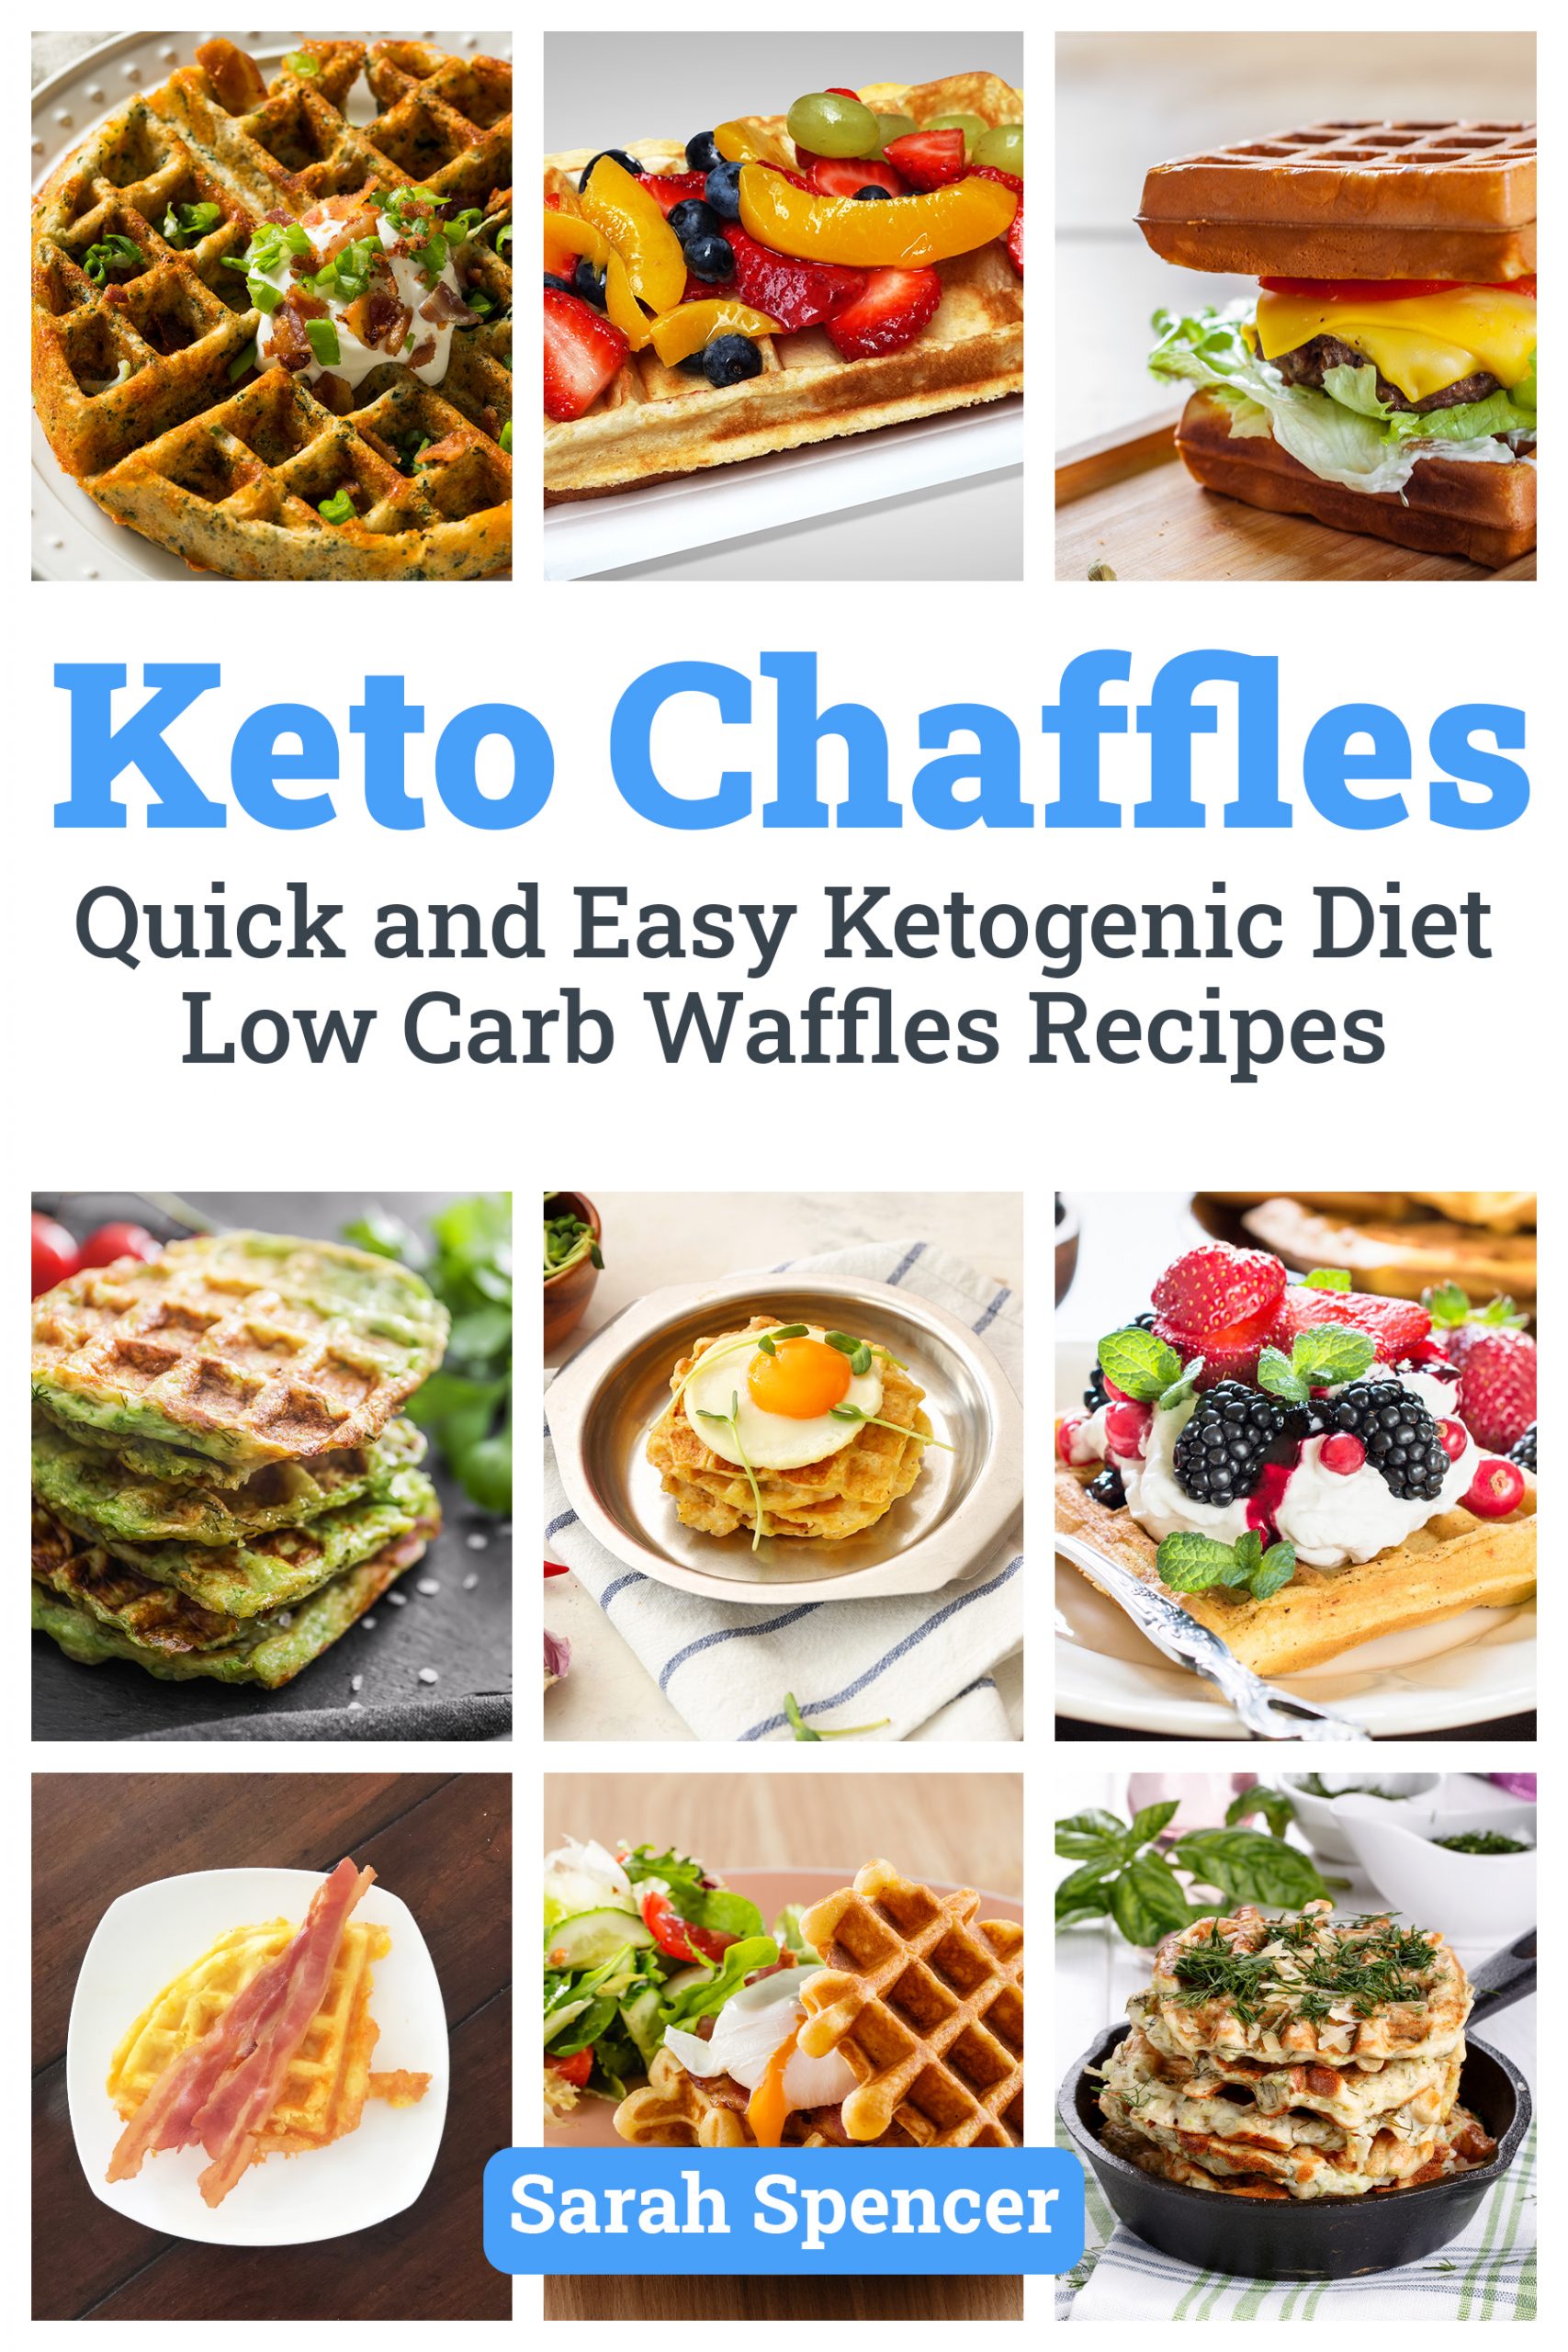 keto_chaffles_FINAL COVER - The Cookbook Publisher